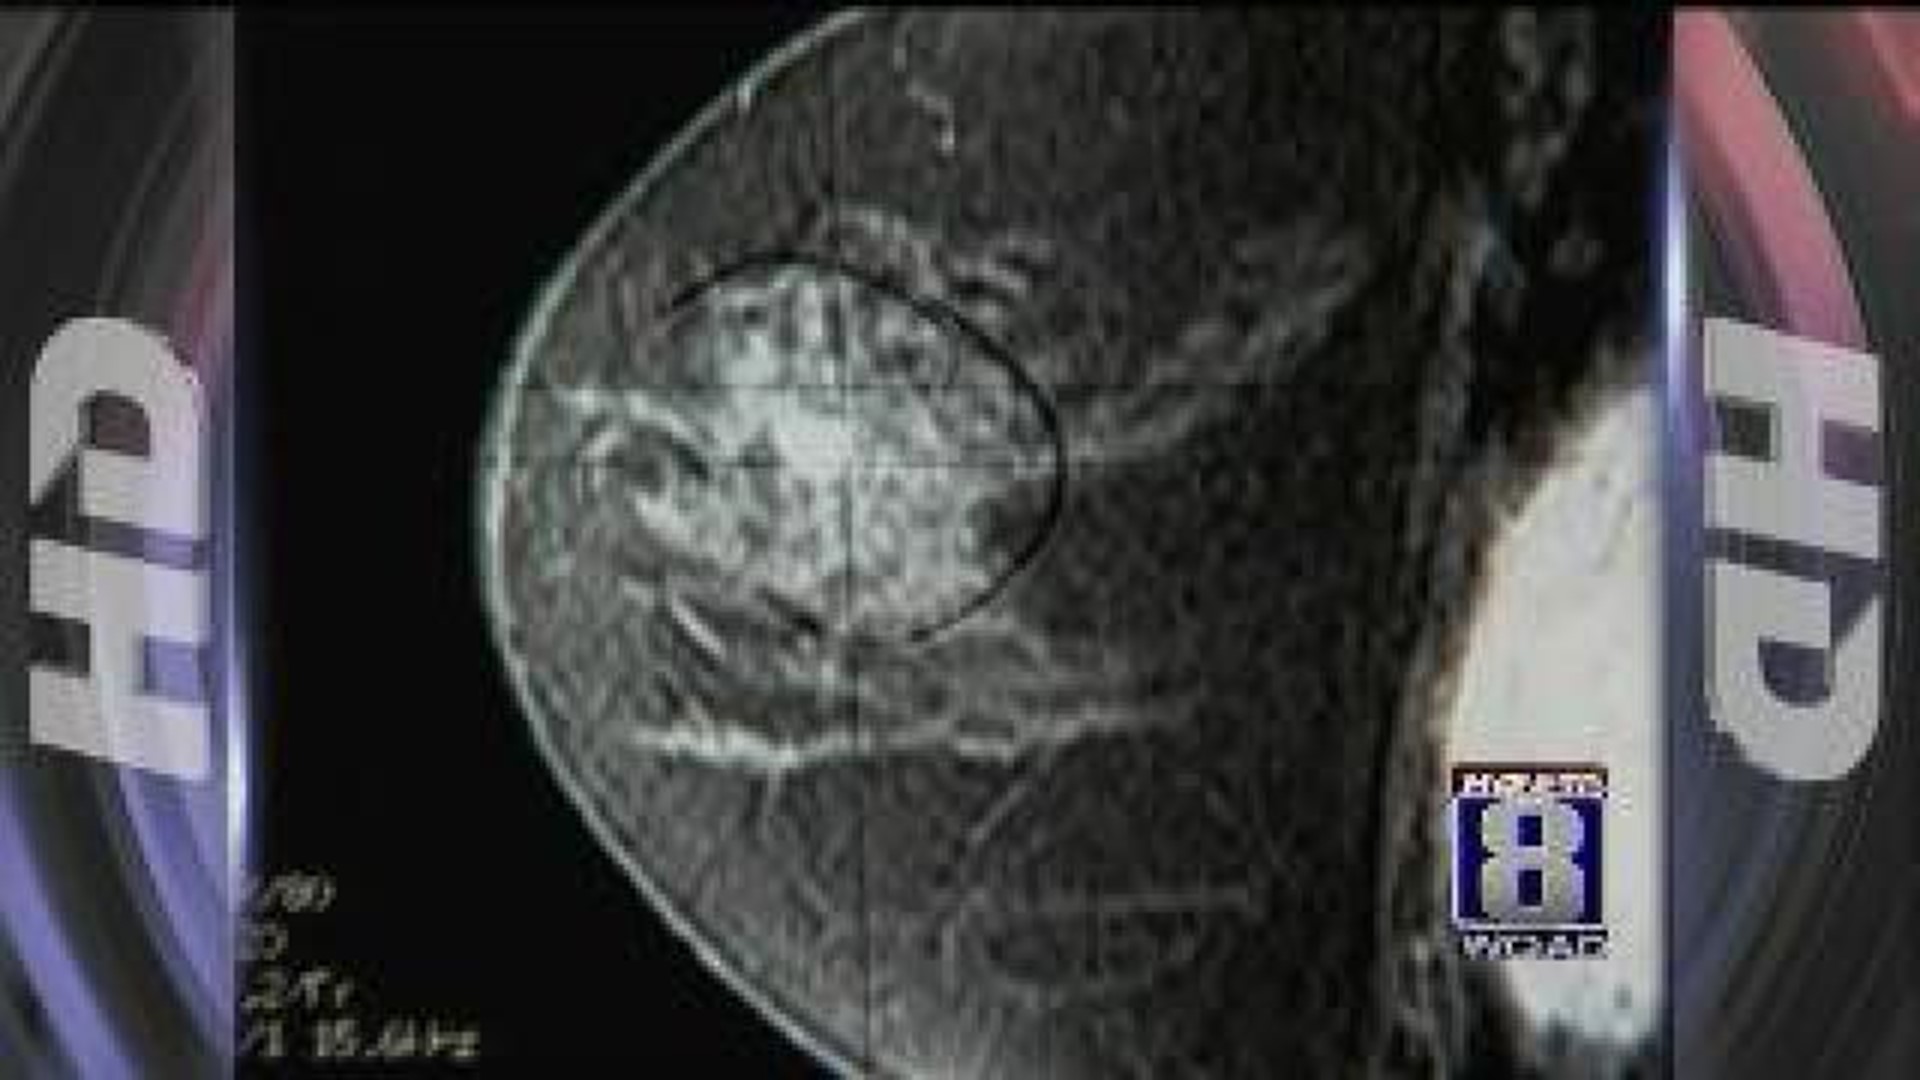 Ultrasounds, MRIs may find developing breast cancer